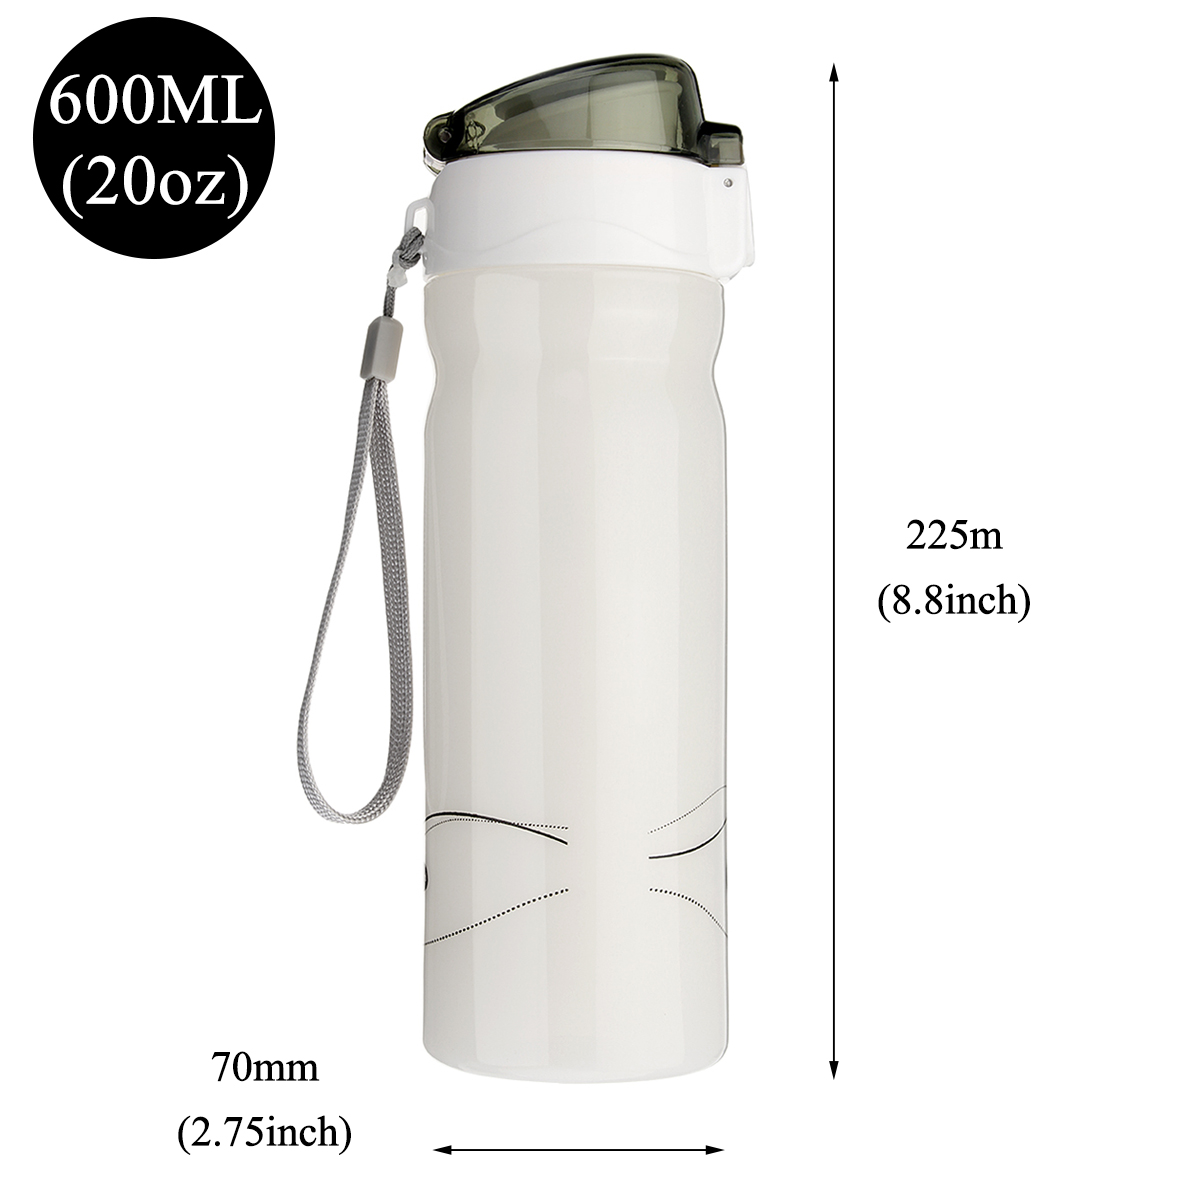 600ml20oz-High-quality-Food-Grade-Water-Bottle-for-long-hikes-trekking-hot-yoga-class-long-load-trip-1523049-2